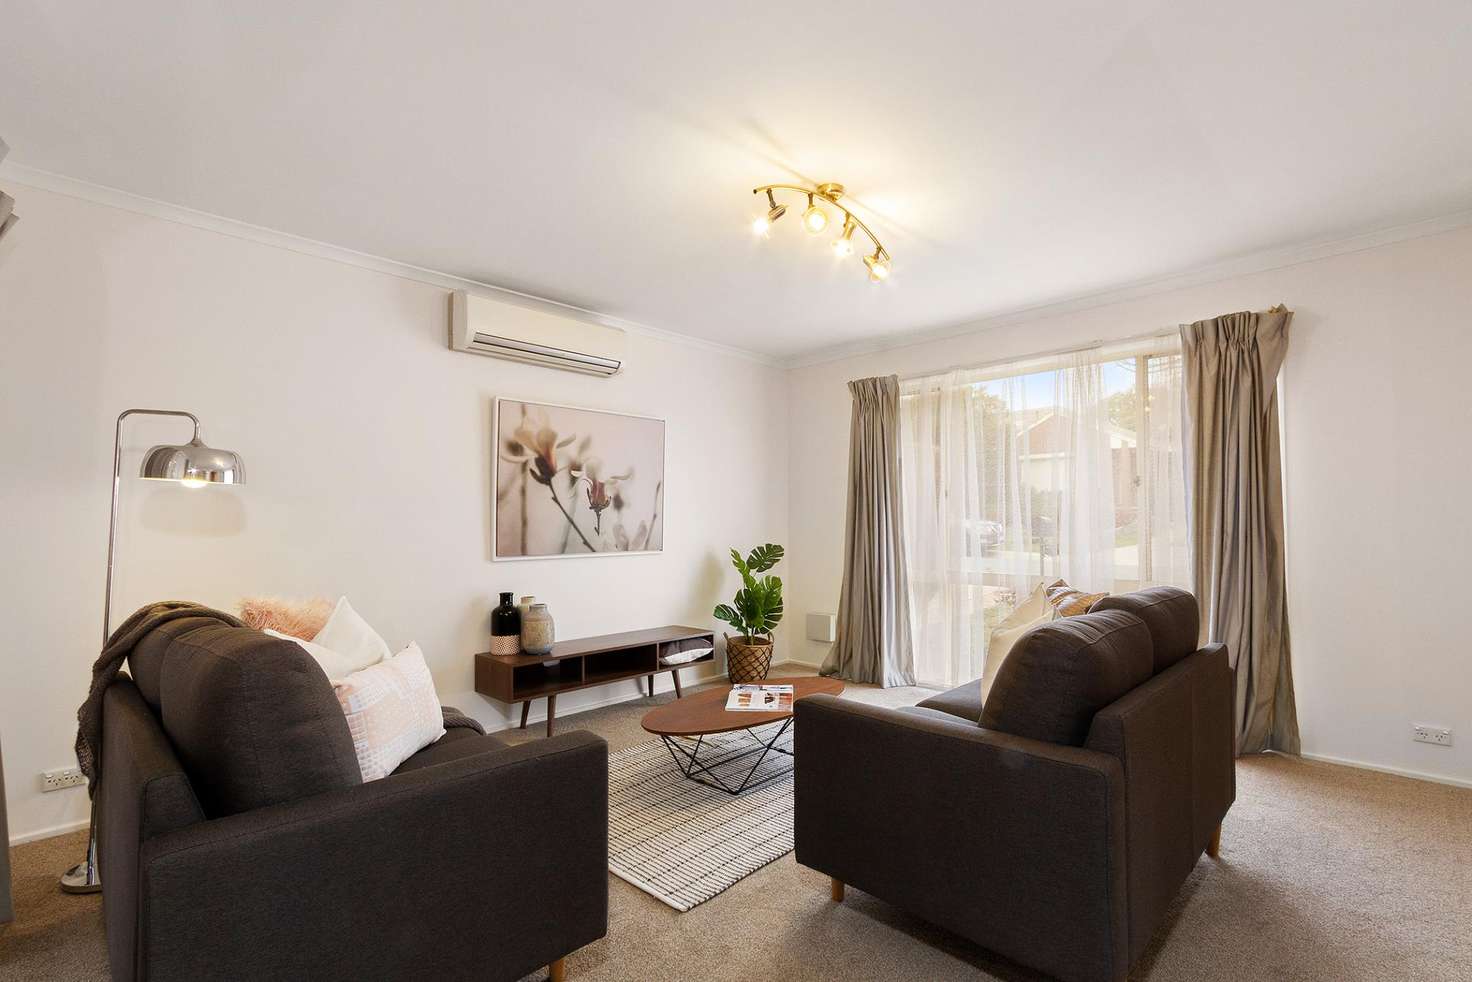 Main view of Homely house listing, 4 Samuels Crescent, Ngunnawal ACT 2913